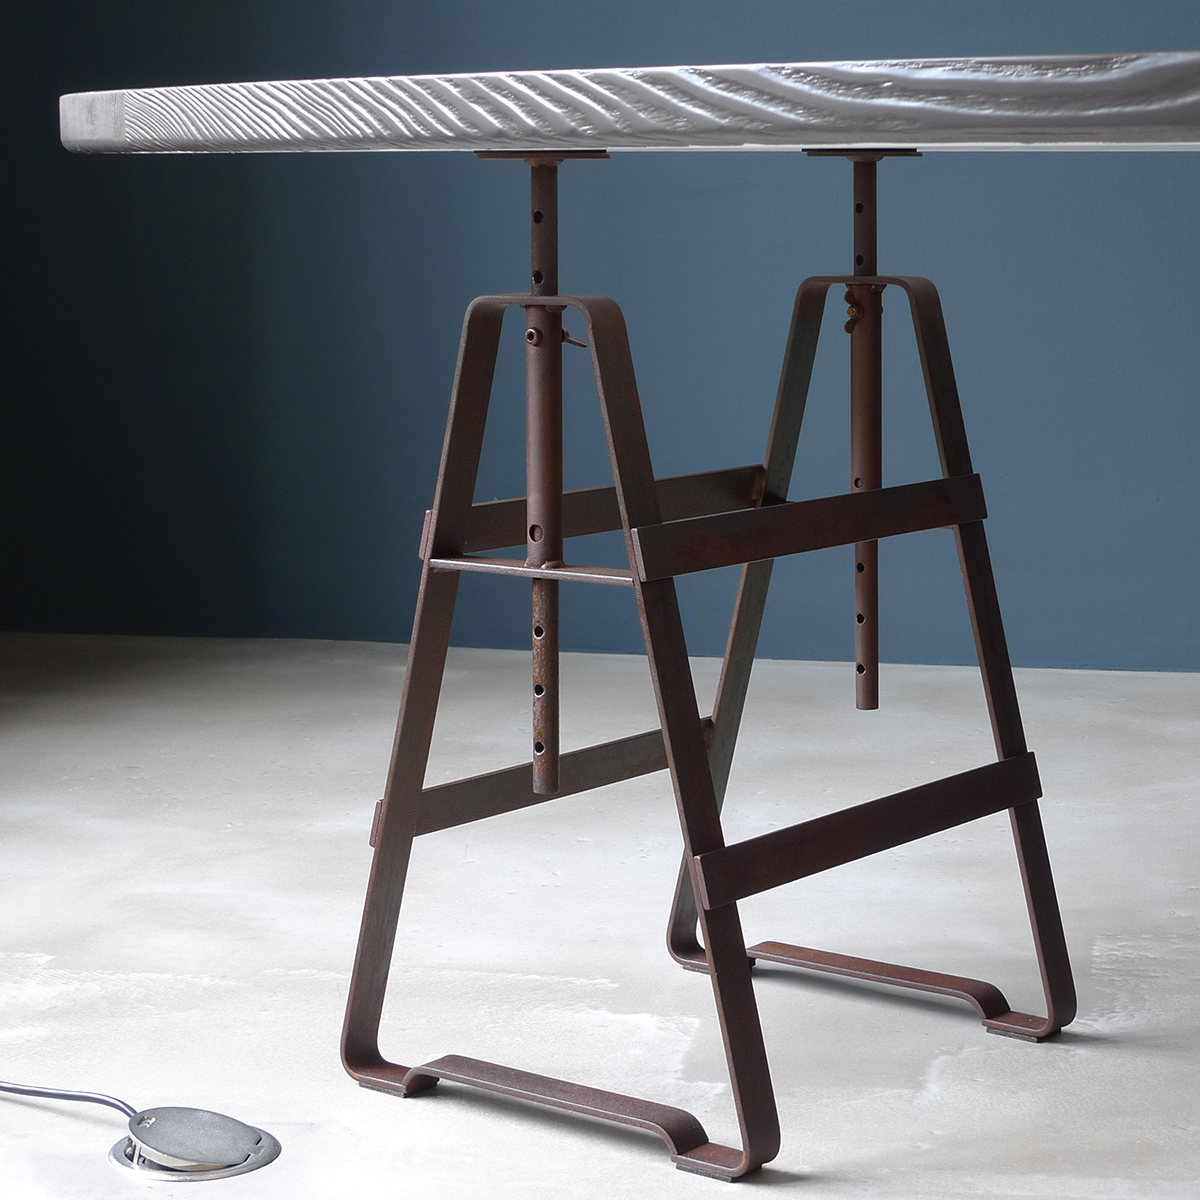 Lackaffe,Design Thesenfitz & Wedekind A height adjustable trestle made from oiled crude steel.